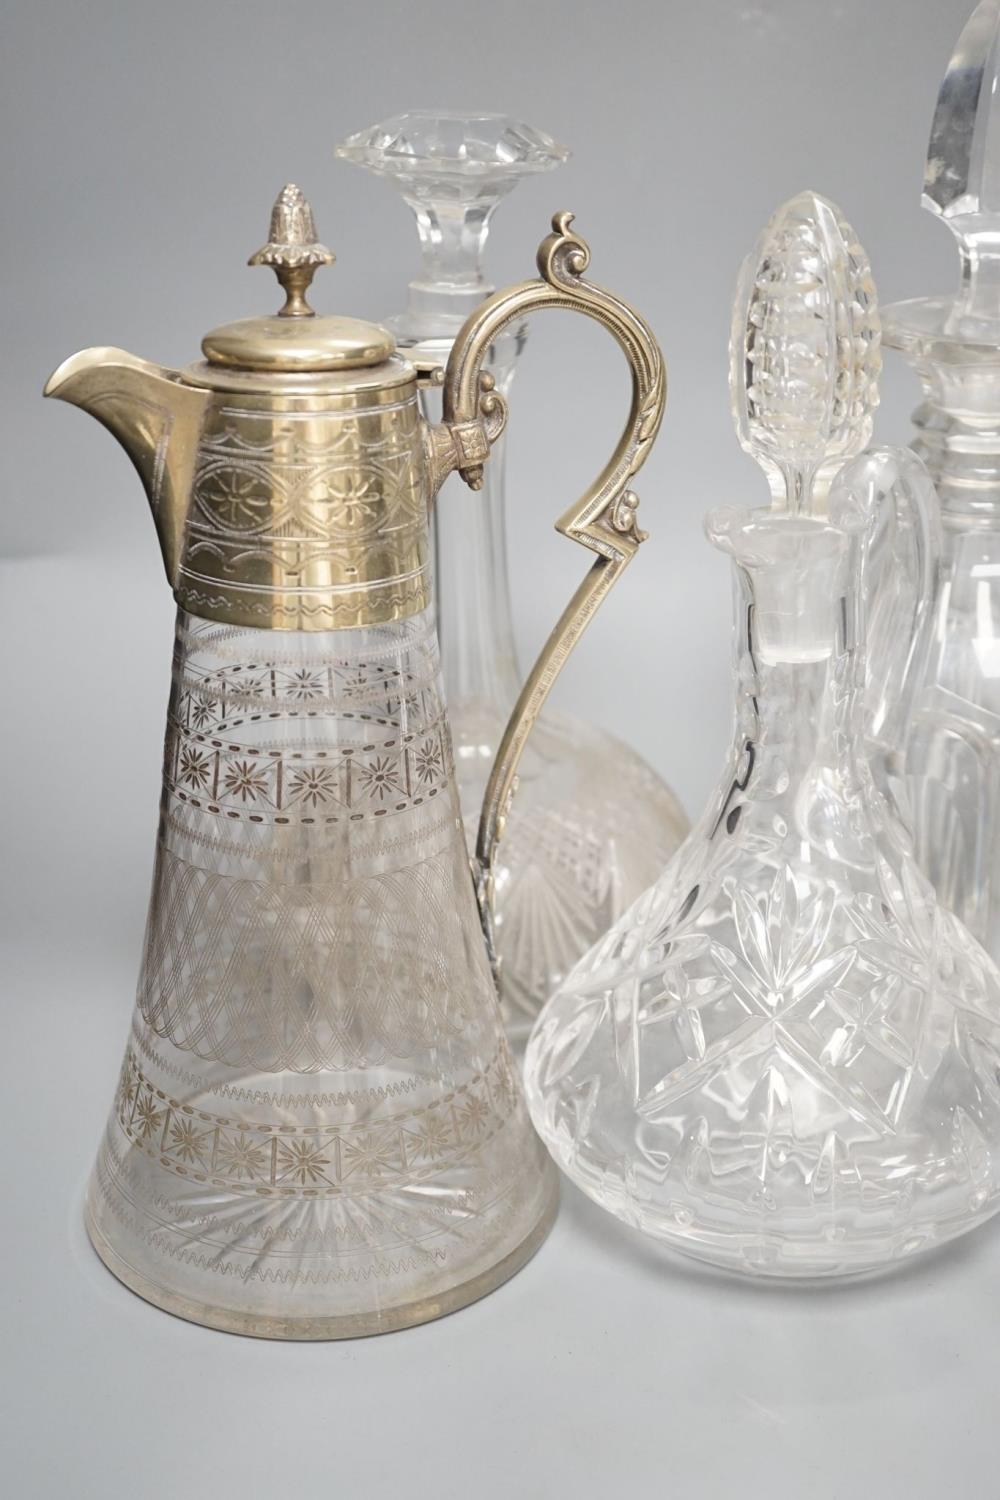 A Hukin and Heath claret jug and other decanters etc. - Image 2 of 9